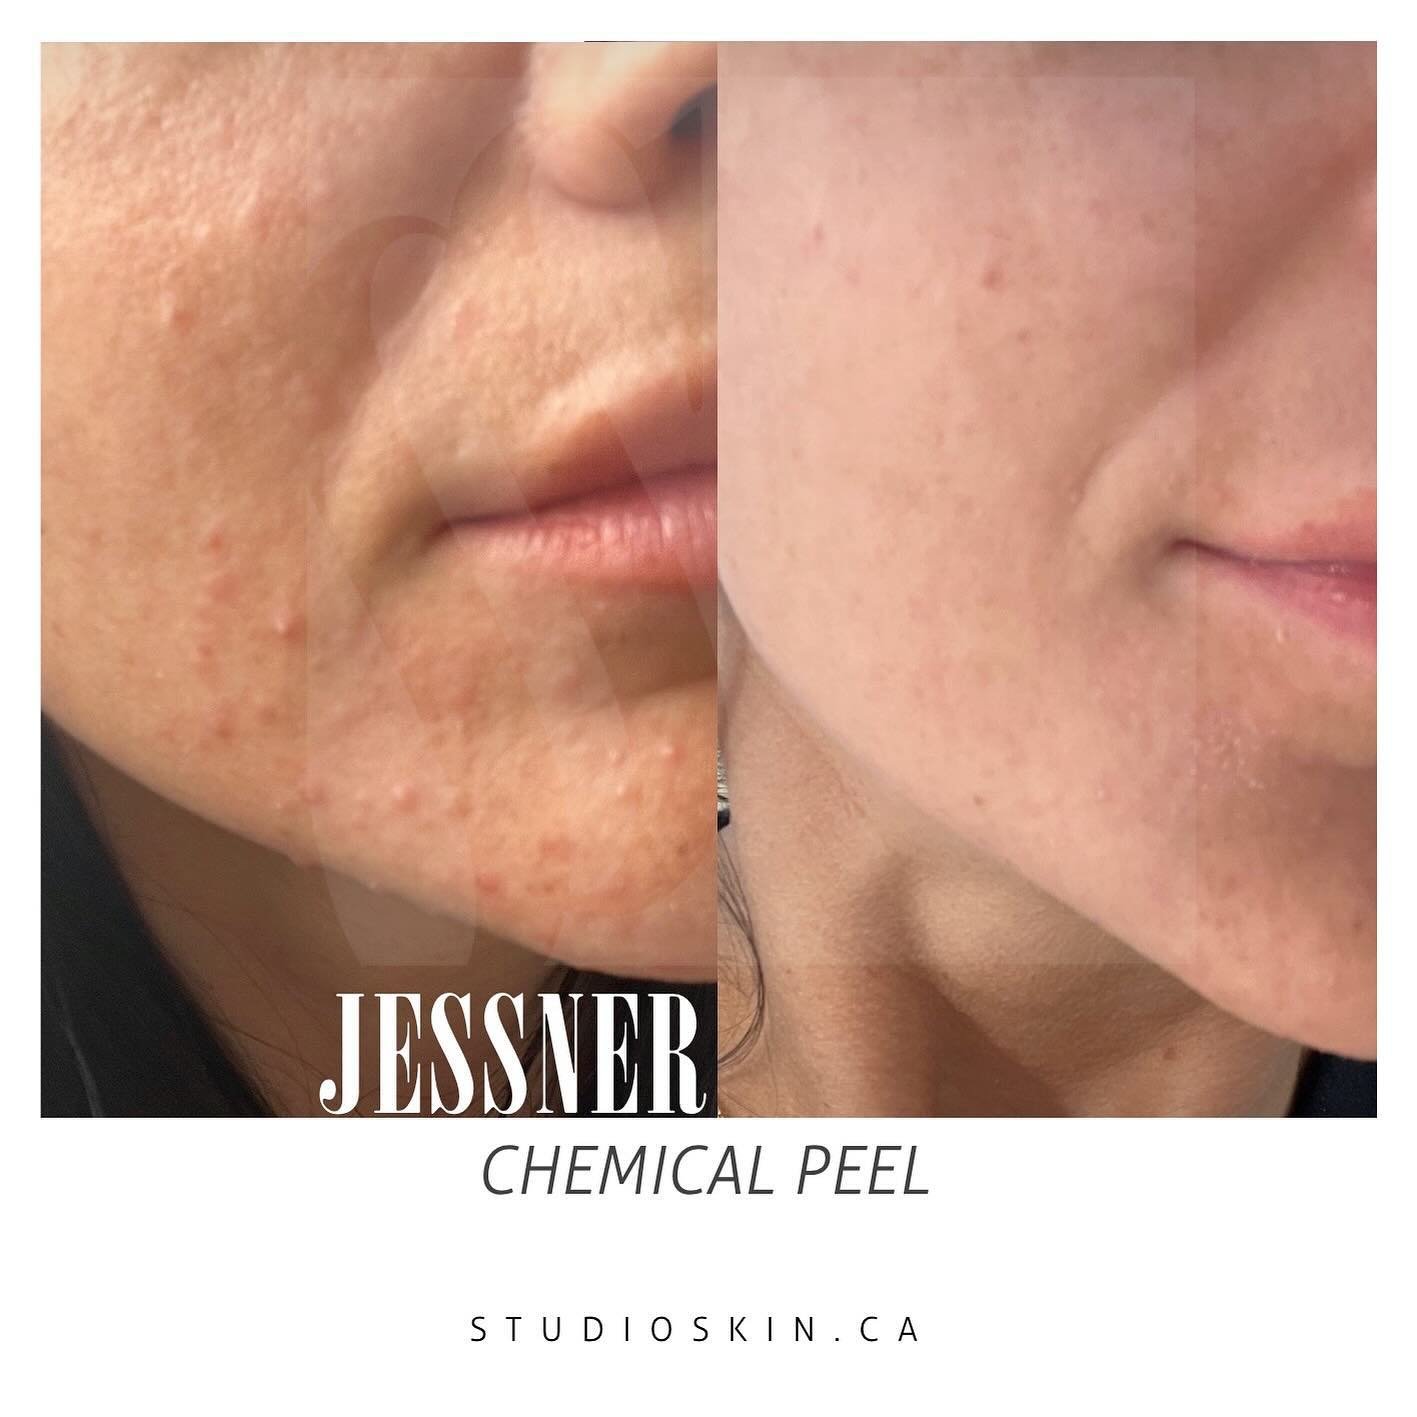 ✨The difference in only two weeks!✨

The Jessner chemical peel is a popular treatment for acne because it combines three key ingredients: salicylic acid, lactic acid, and resorcinol. These ingredients work together to exfoliate the skin, unclog pores